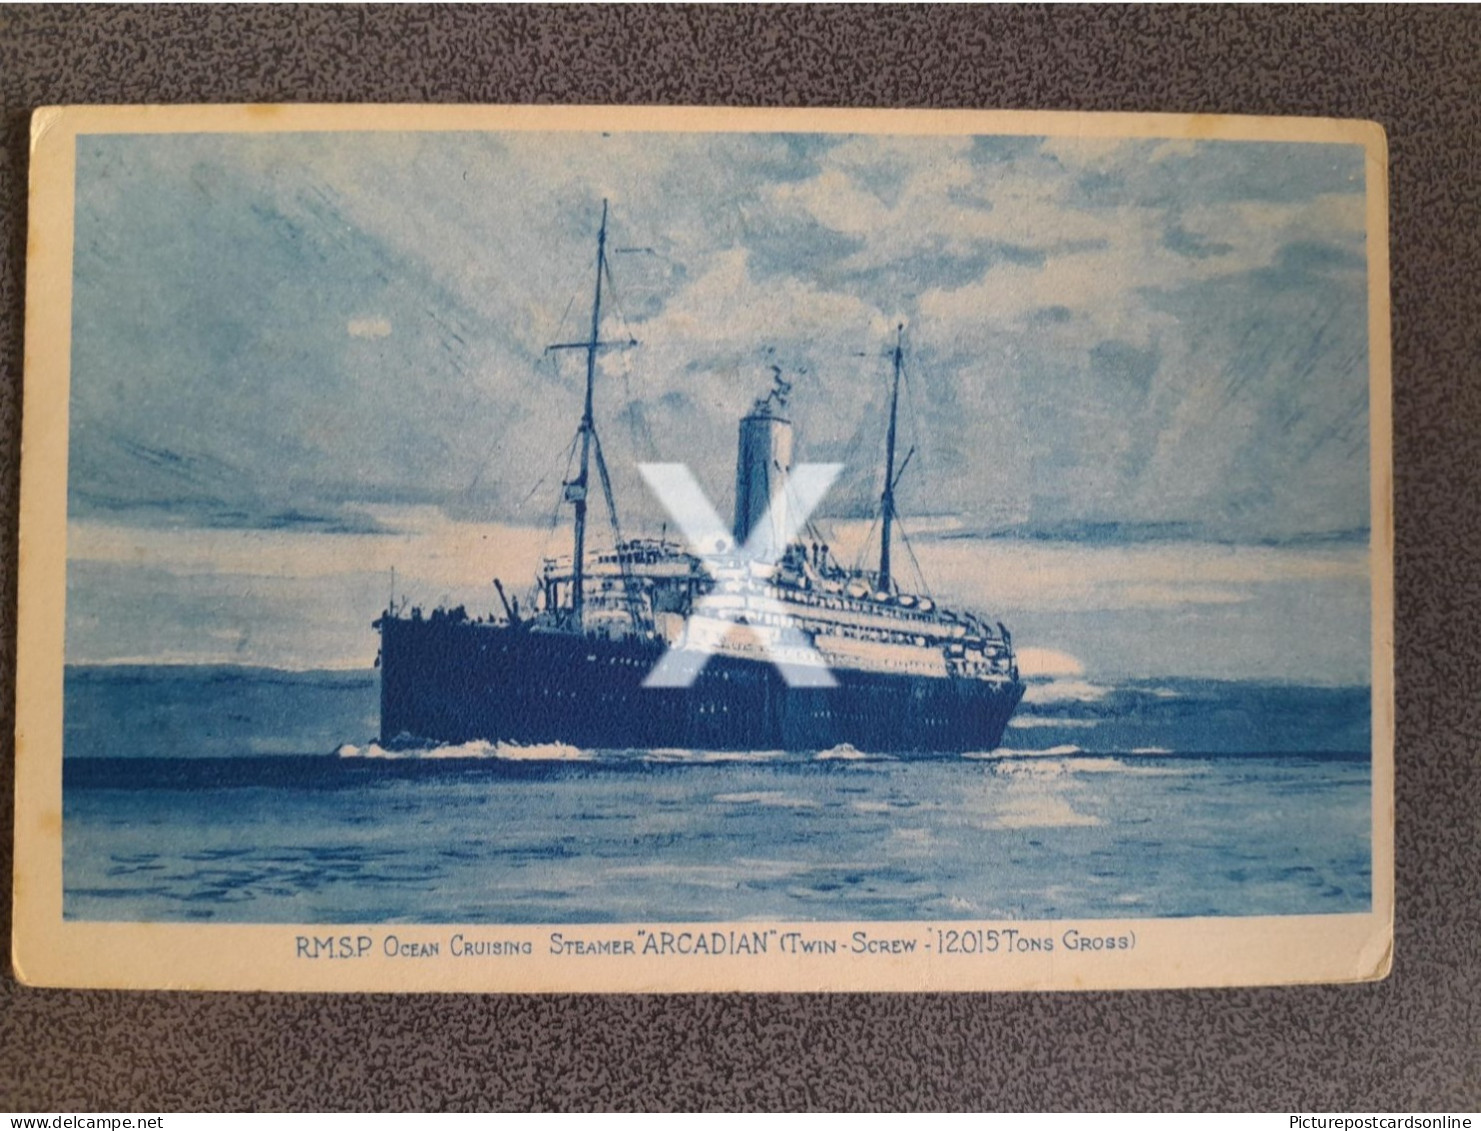 ROYAL MAIL STEAM PACKET R.MS.P. OCEAN CRUISING STEAMER ARCADIAN OLD B/W POSTCARD STEAMER SHIPPING - Paquebote